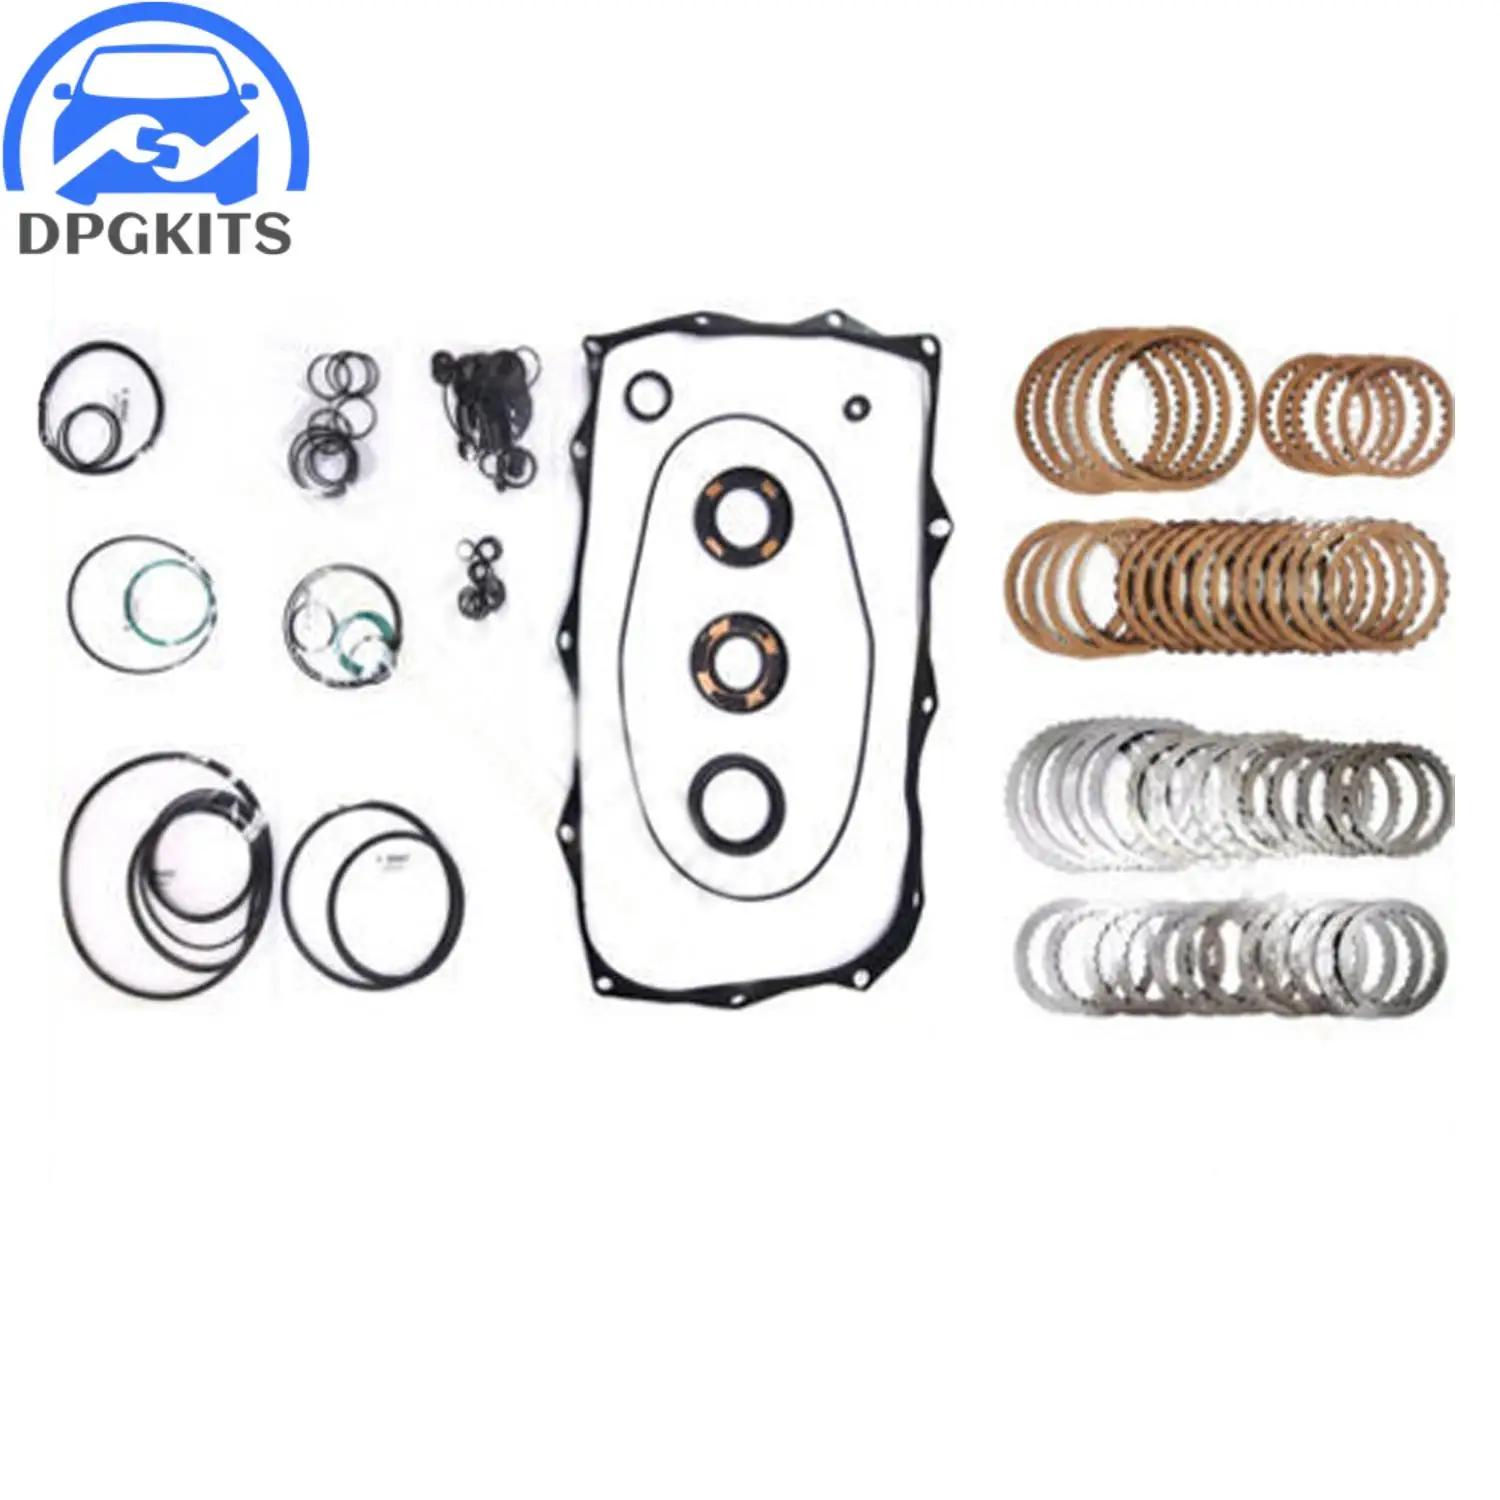 

1set 8HP45 Auto Transmission Master Rebuild Kit Overhaul For BMW 1/3/5 XJ SERIES X1 X3 XF DISCOVERY With 3 Months Warranty